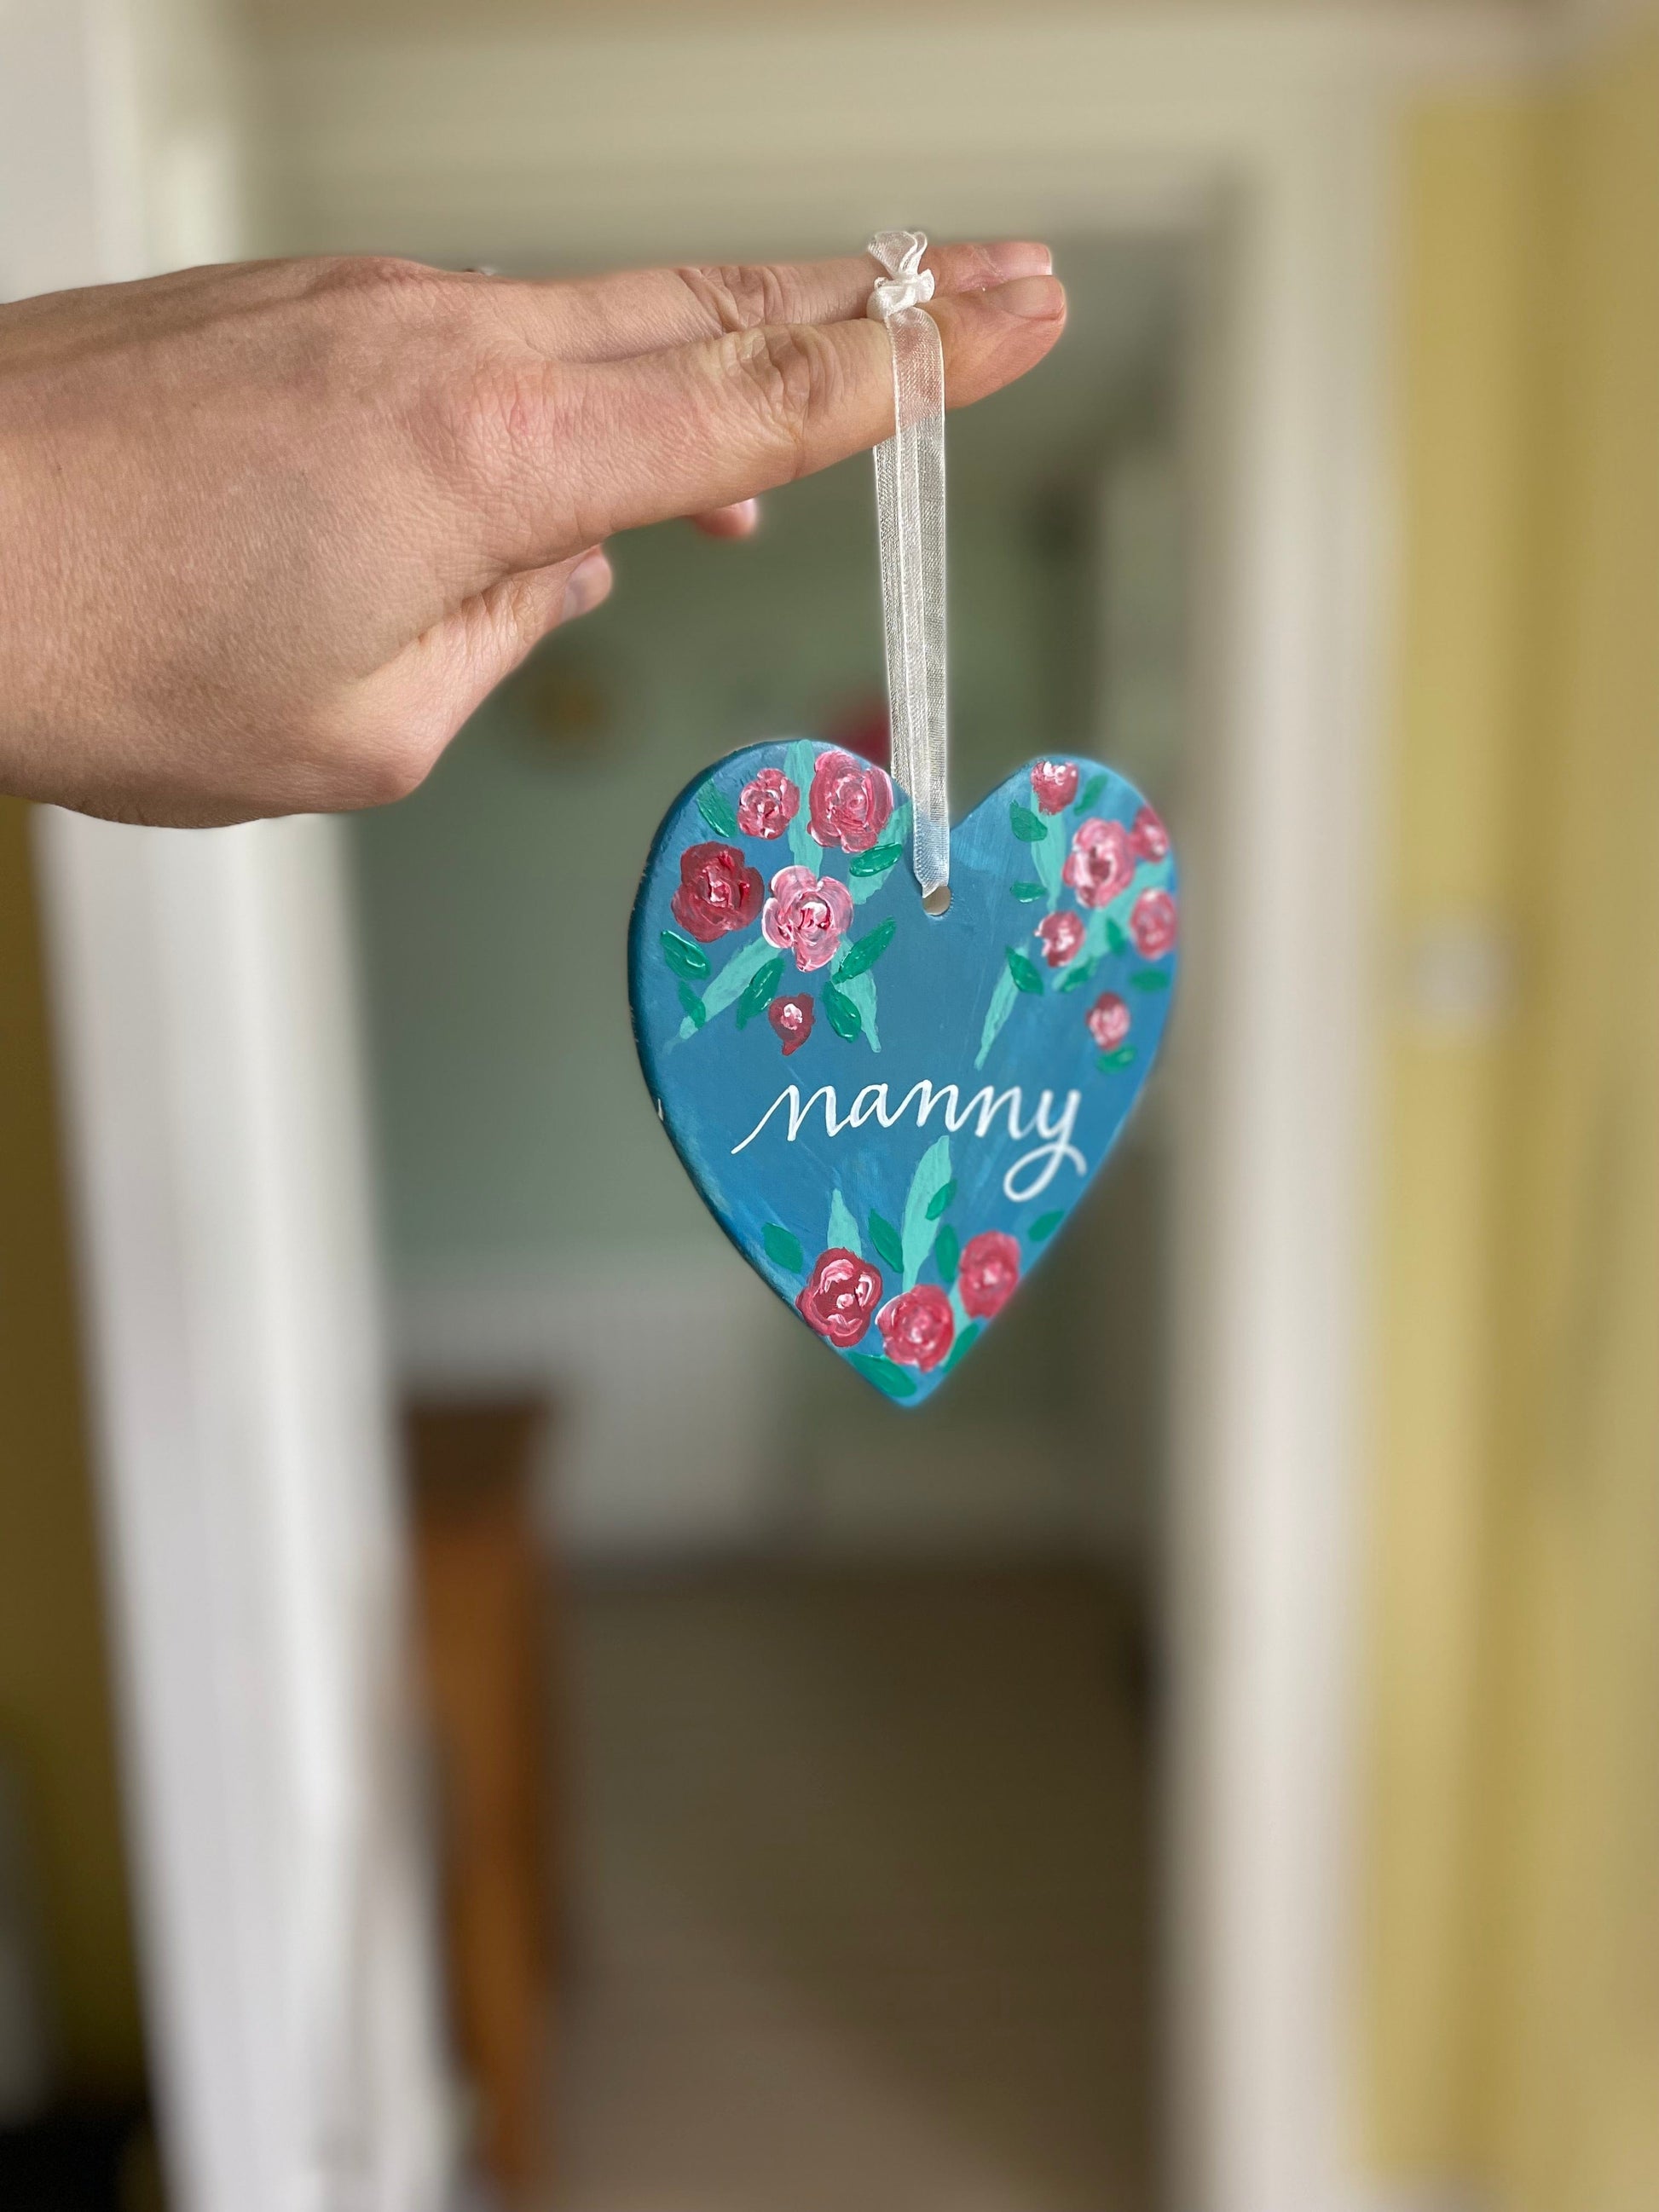 And Hope Designs Personalised with: Painted ceramic heart - Mother’s Day